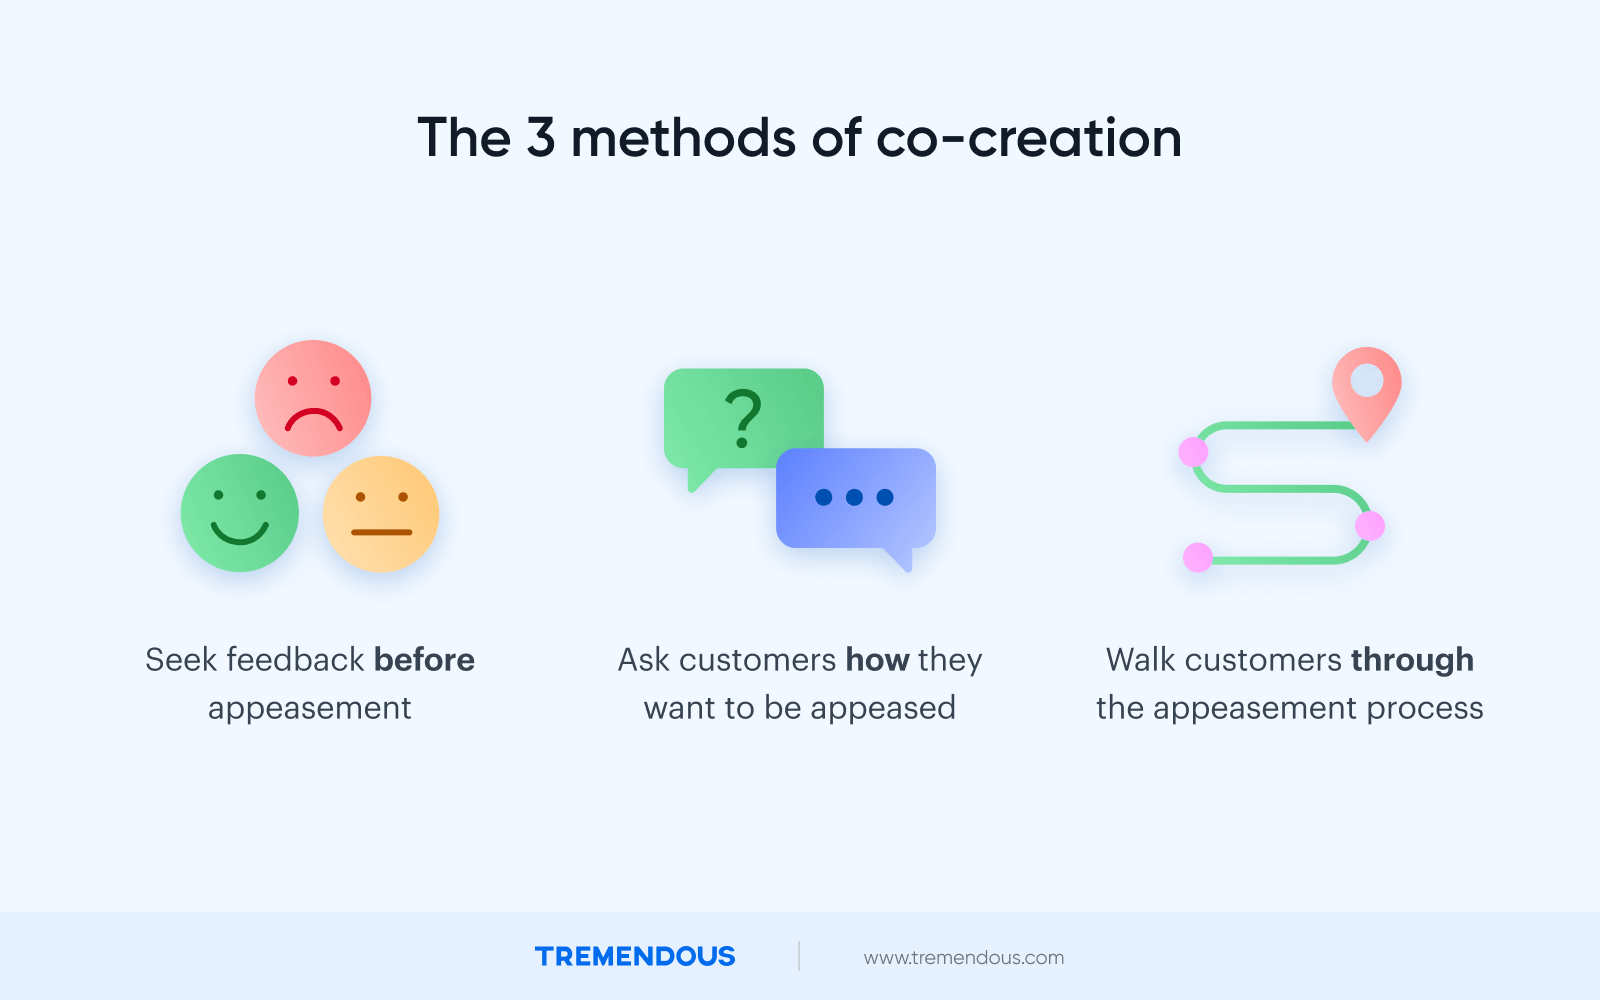 Images showing the 3 methods of co-creation, which include seeking feedback before appeasement, asking customers how they want to be appeased, and walking customers through the appeasement process.